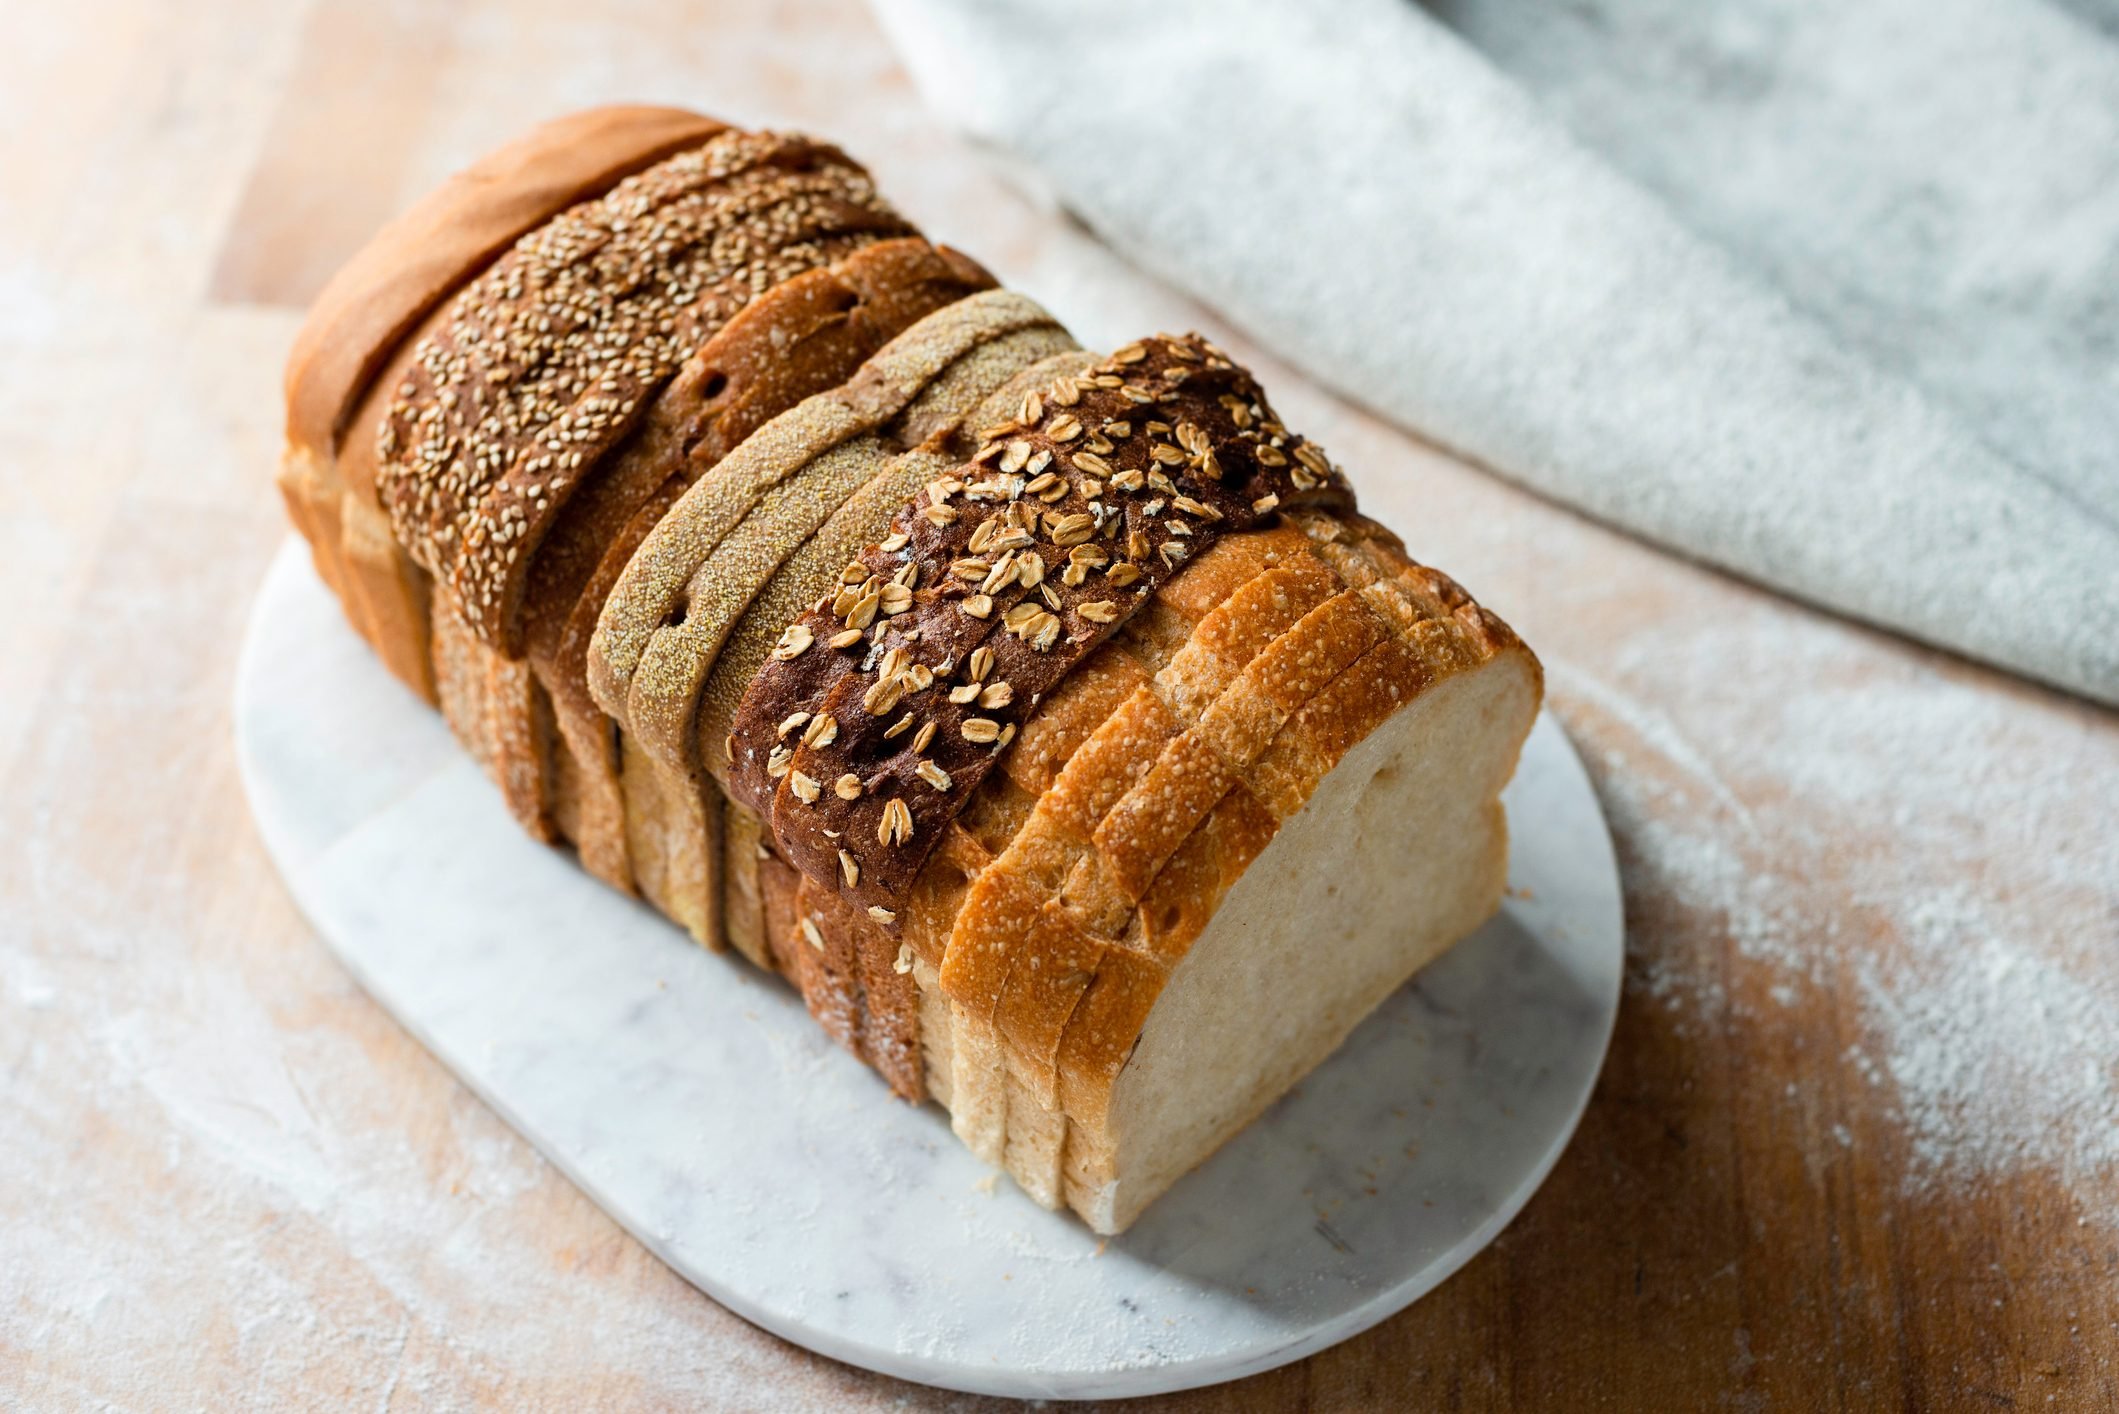 What Is the Healthiest Bread? - The Healthy